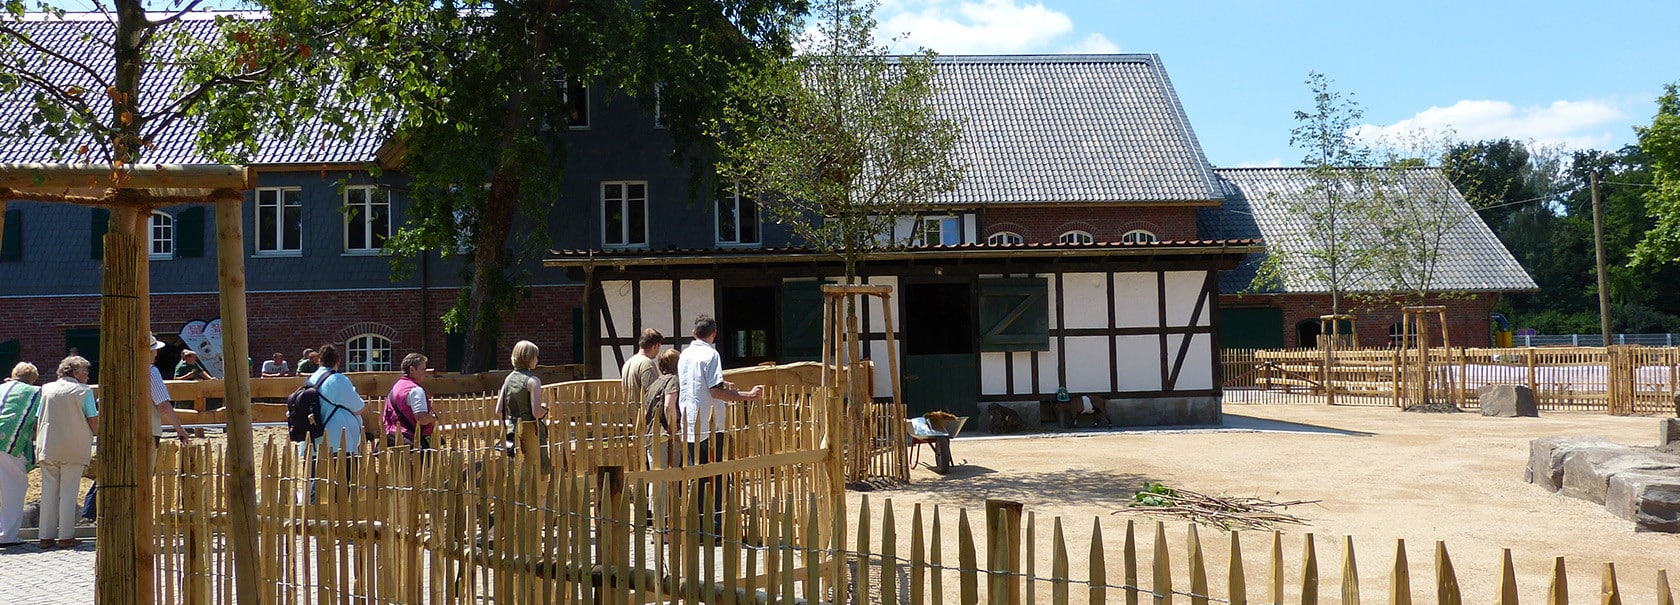 Country Living in the Heart of Cologne – Clemenshof Opening at Cologne Zoo